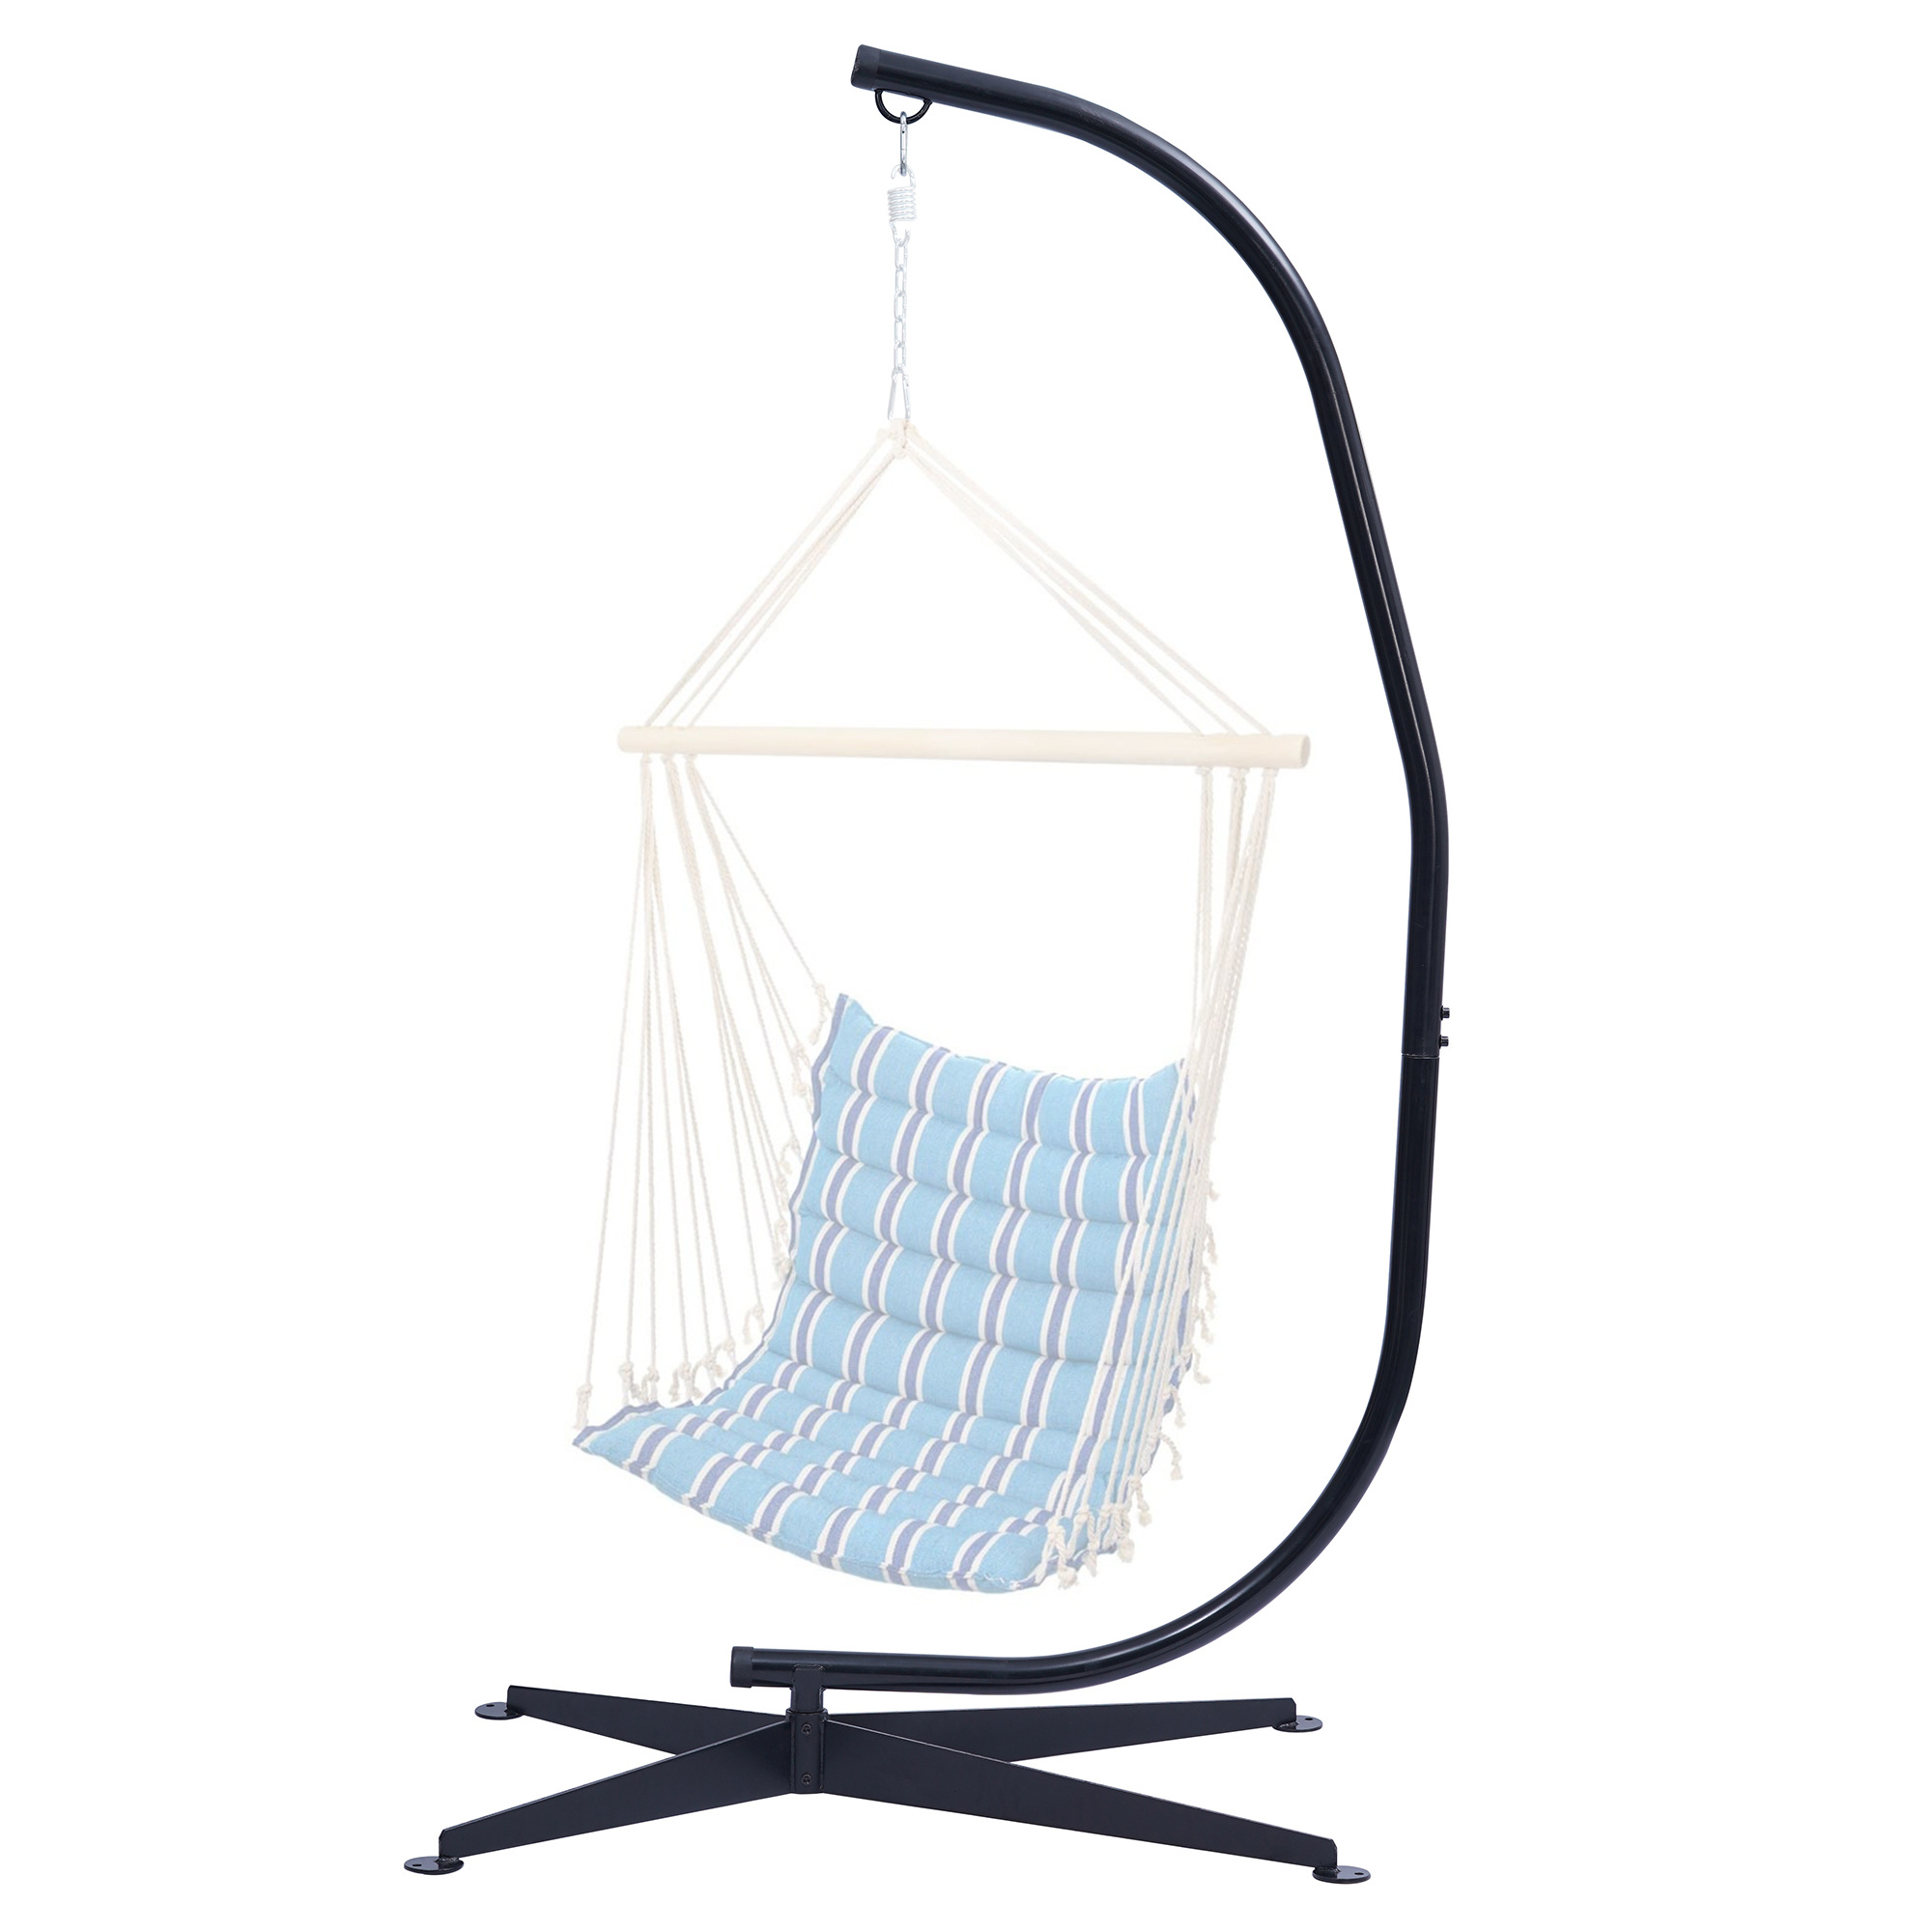 Hammock Chair Stand Only - Metal C-Stand for Hanging Hammock Chair,Porch Swing - Indoor or Outdoor Use - Durable 300 Pound Capacity,Black-Boyel Living